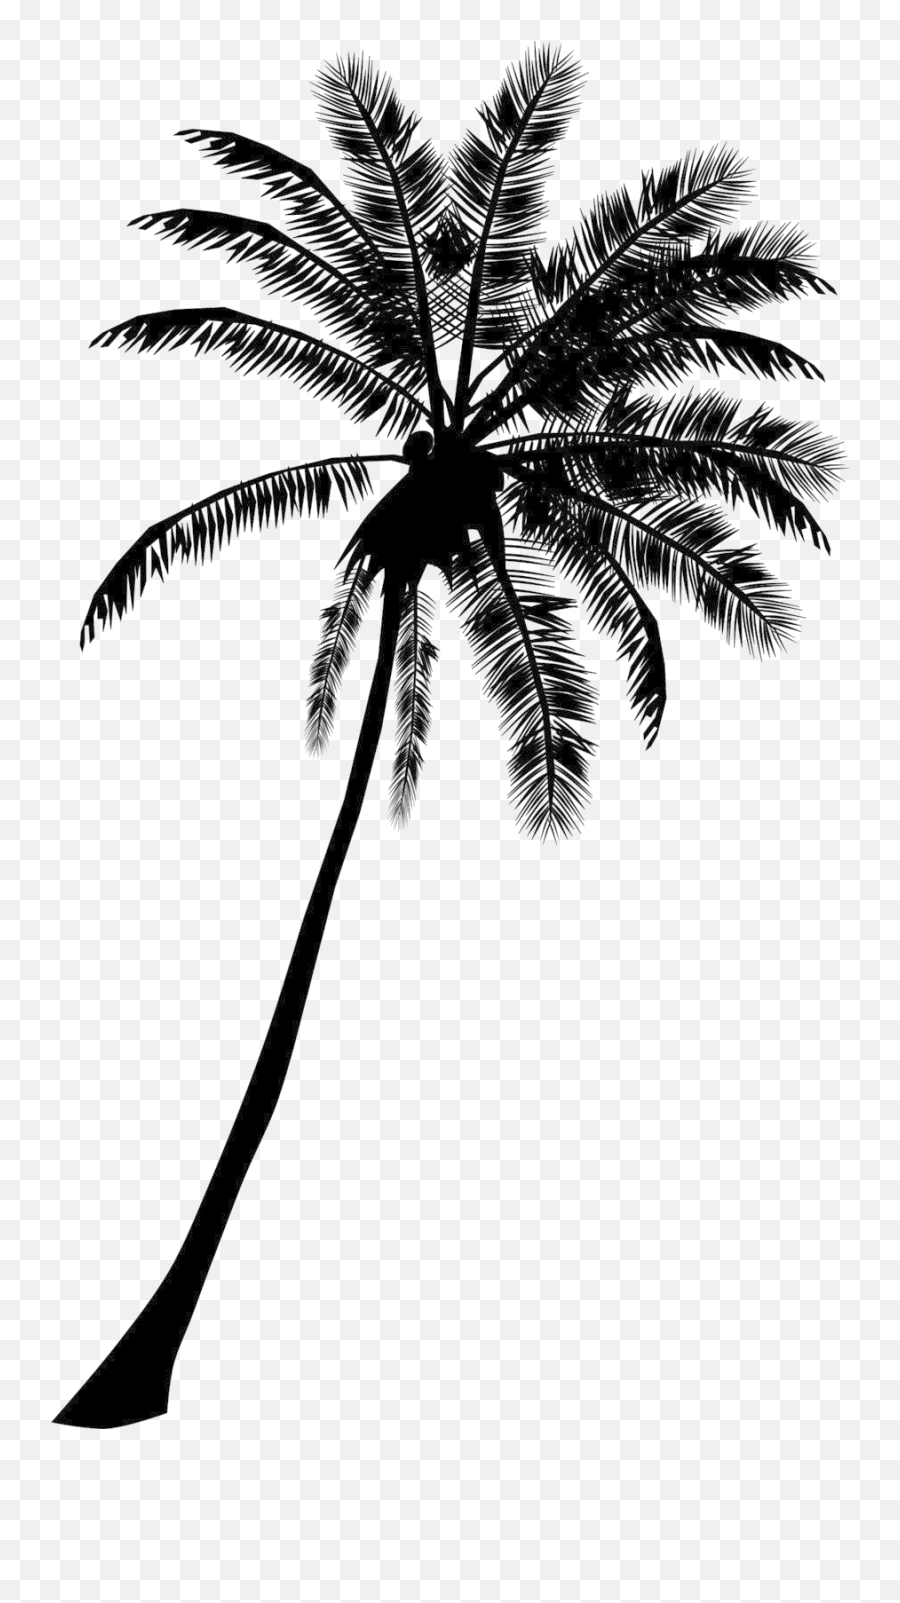 Beach Coconut Tree Png Transparent Images All - Coconut Tree Silhouette Png,Palm Tree Clipart Transparent Background